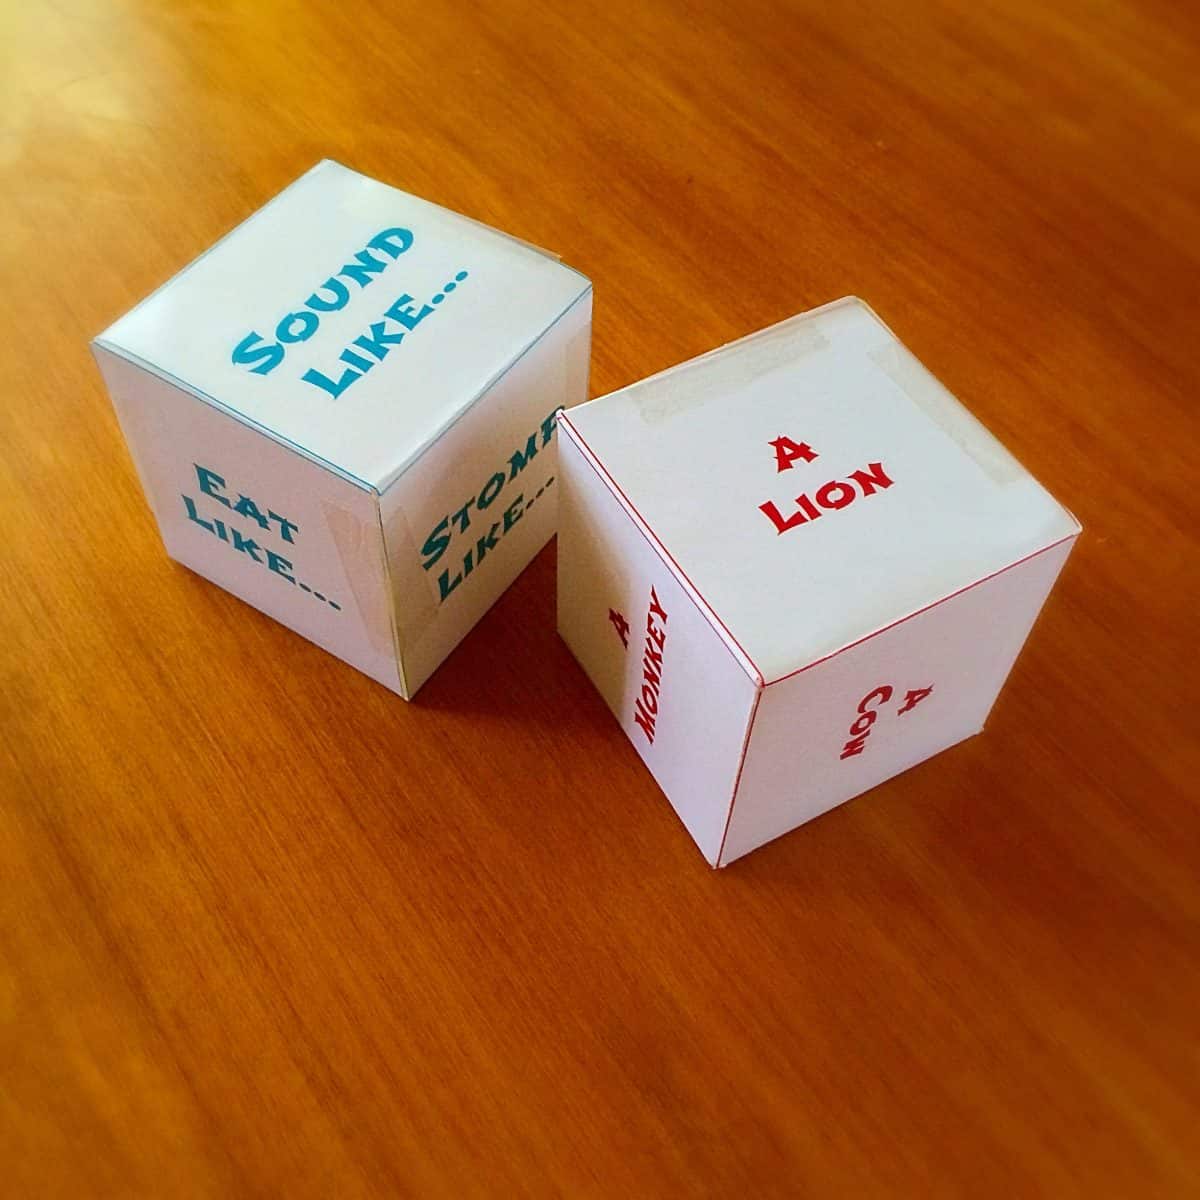 Activity Dice Free Printable - Great for preschoolers and toddlers.